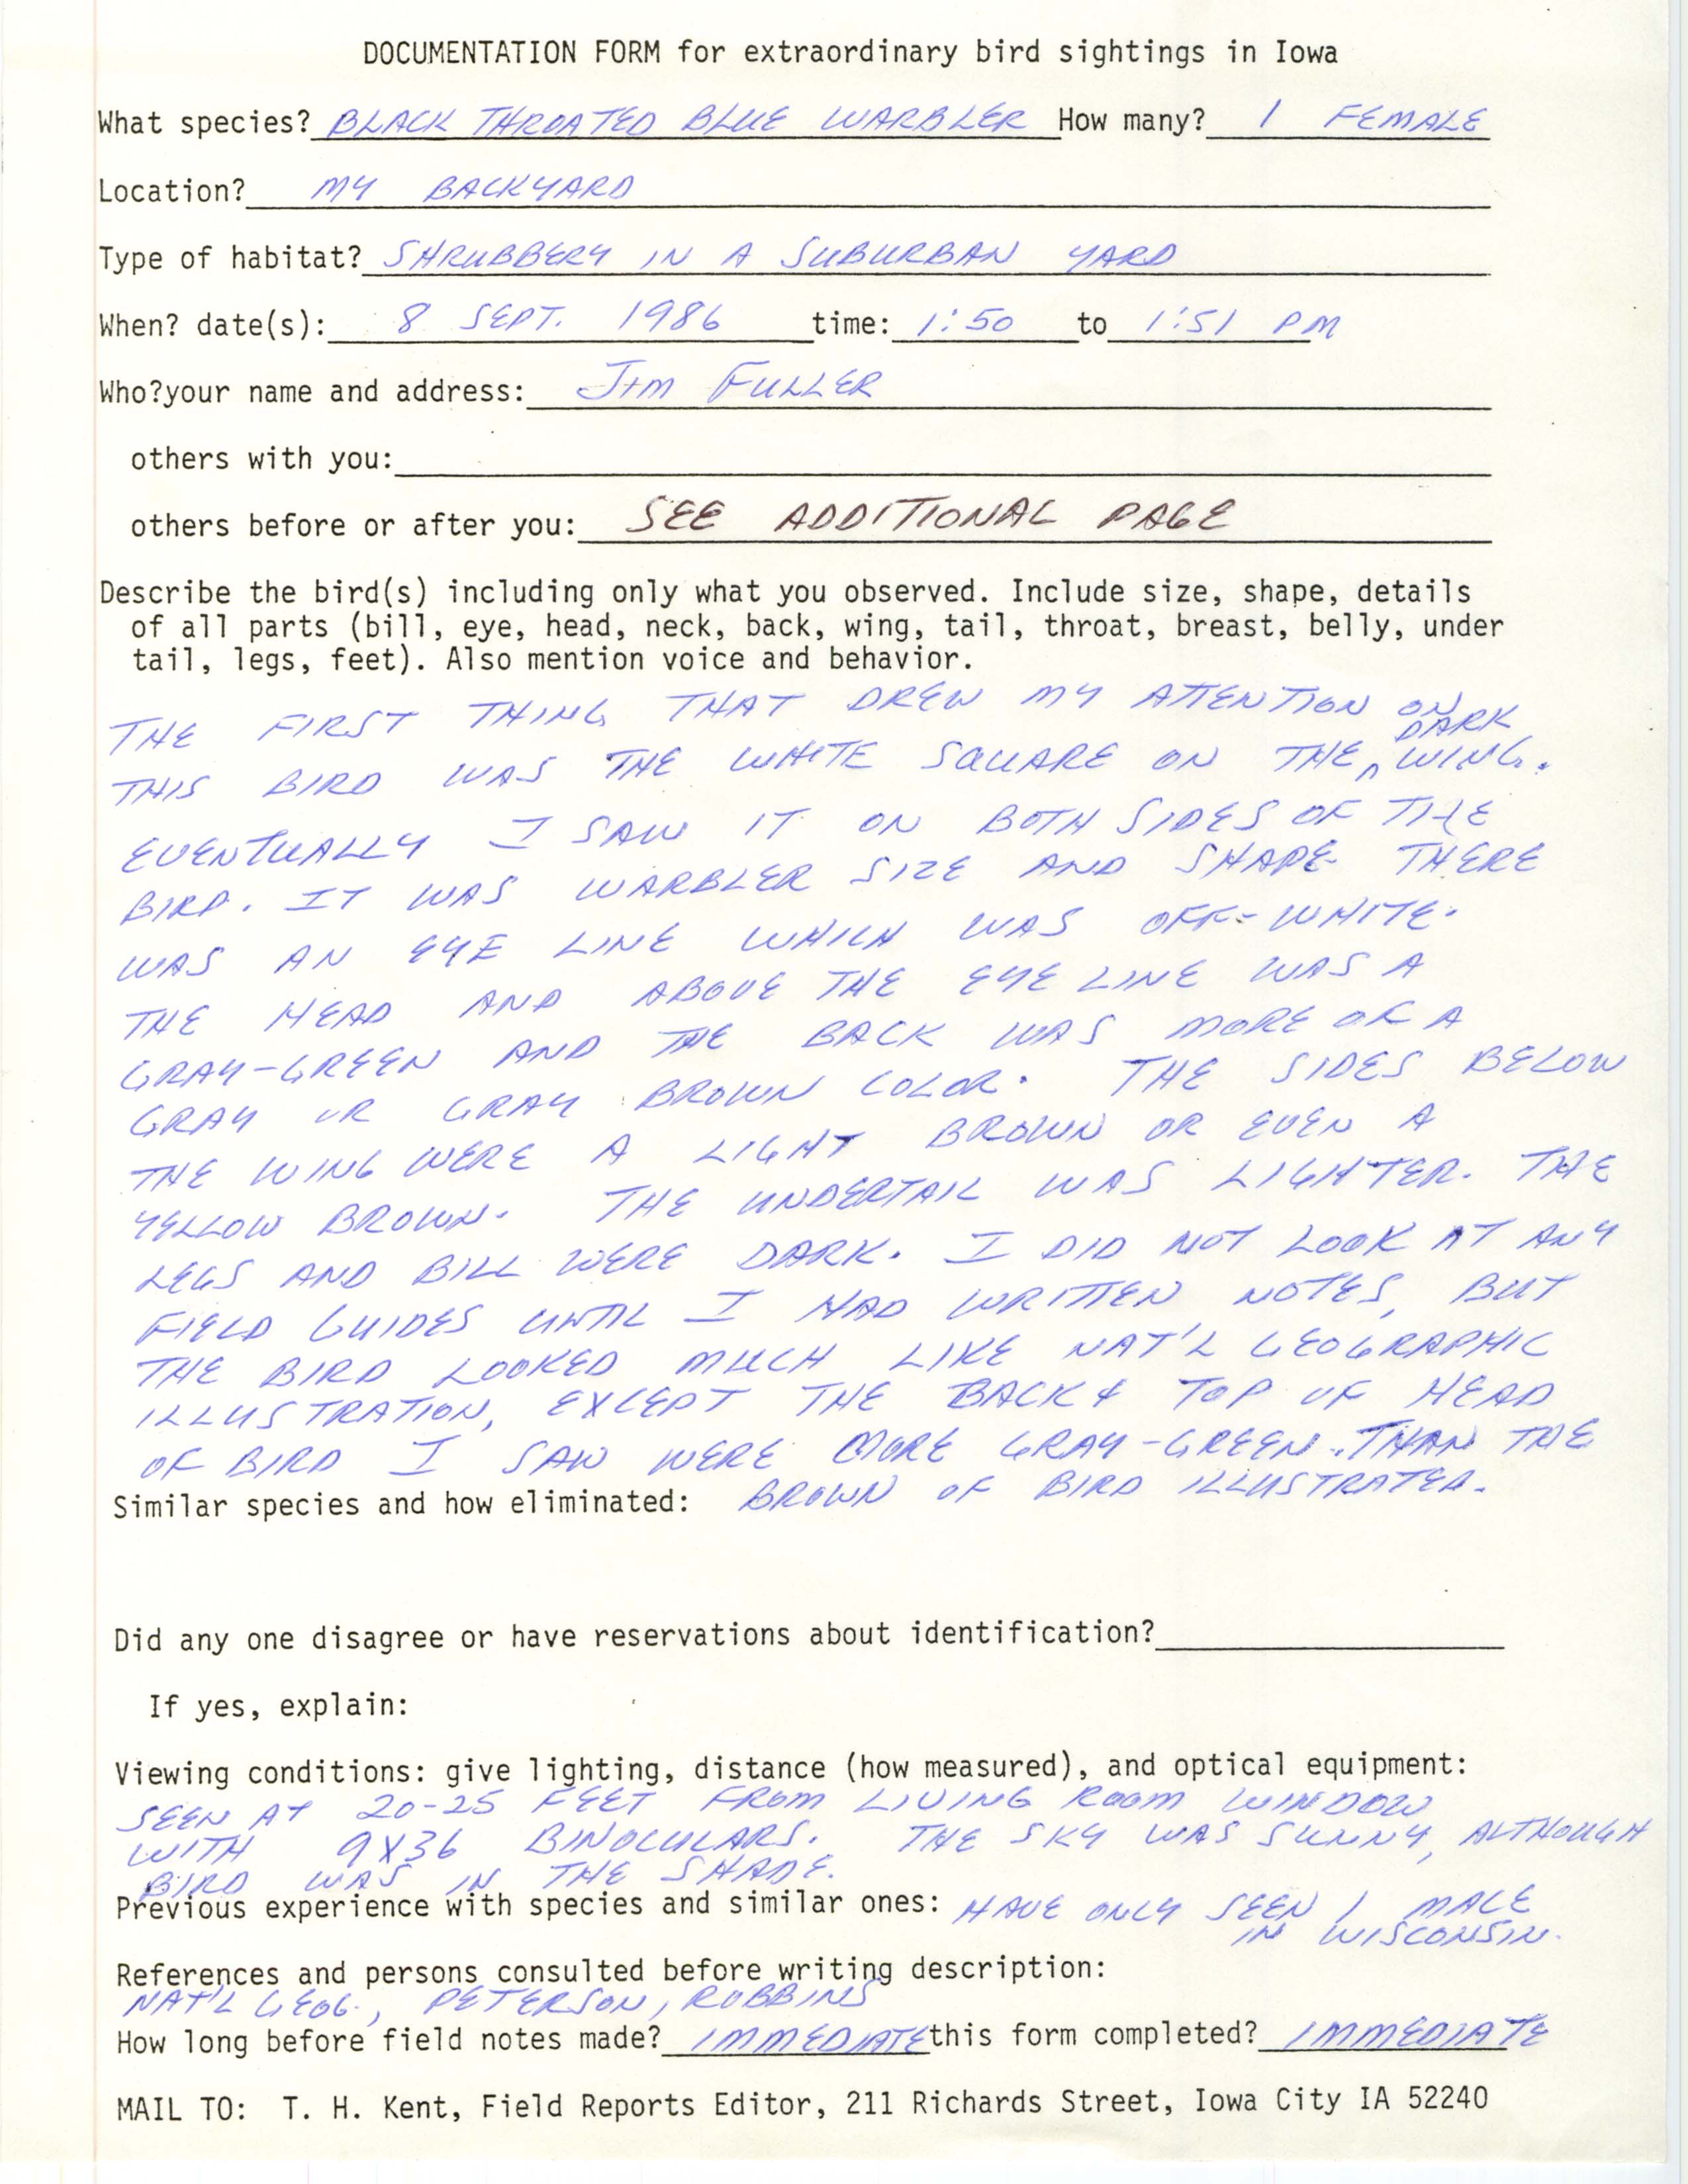 Rare bird documentation form for Black-throated Blue Warbler at Iowa City, 1986